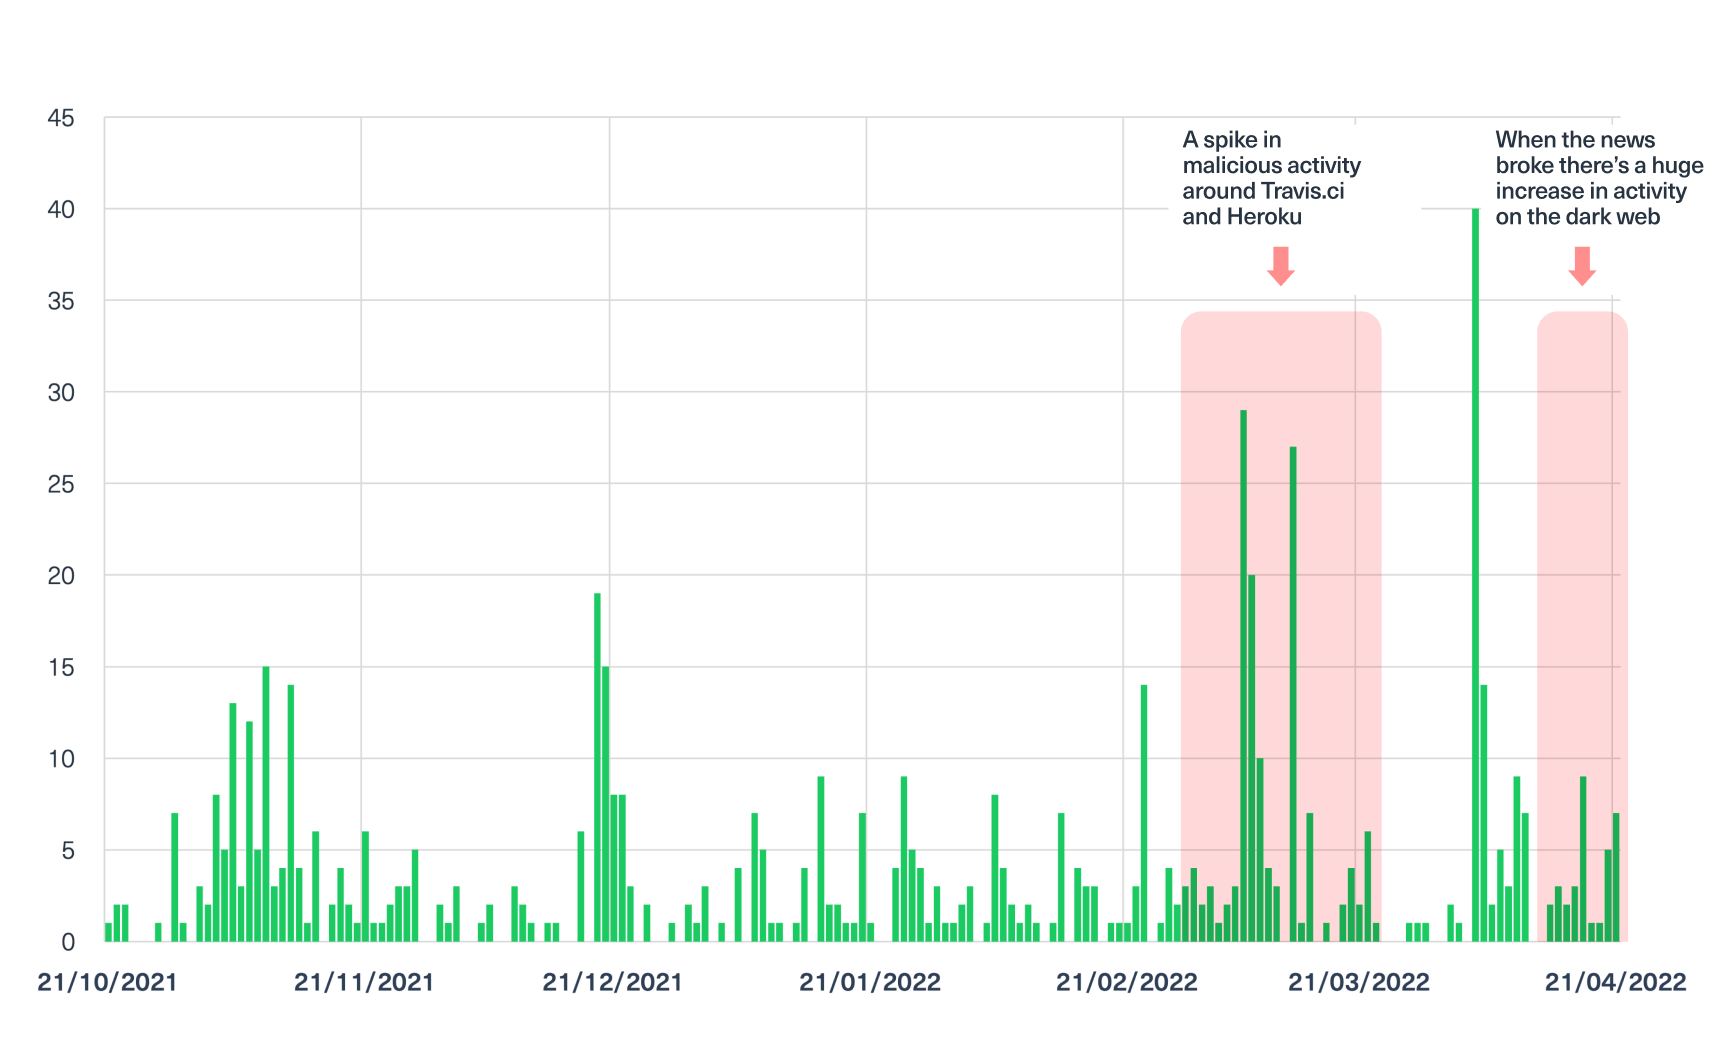 The number of mentions of Travis.ci and Heroku on the dark web over the past 4 months.